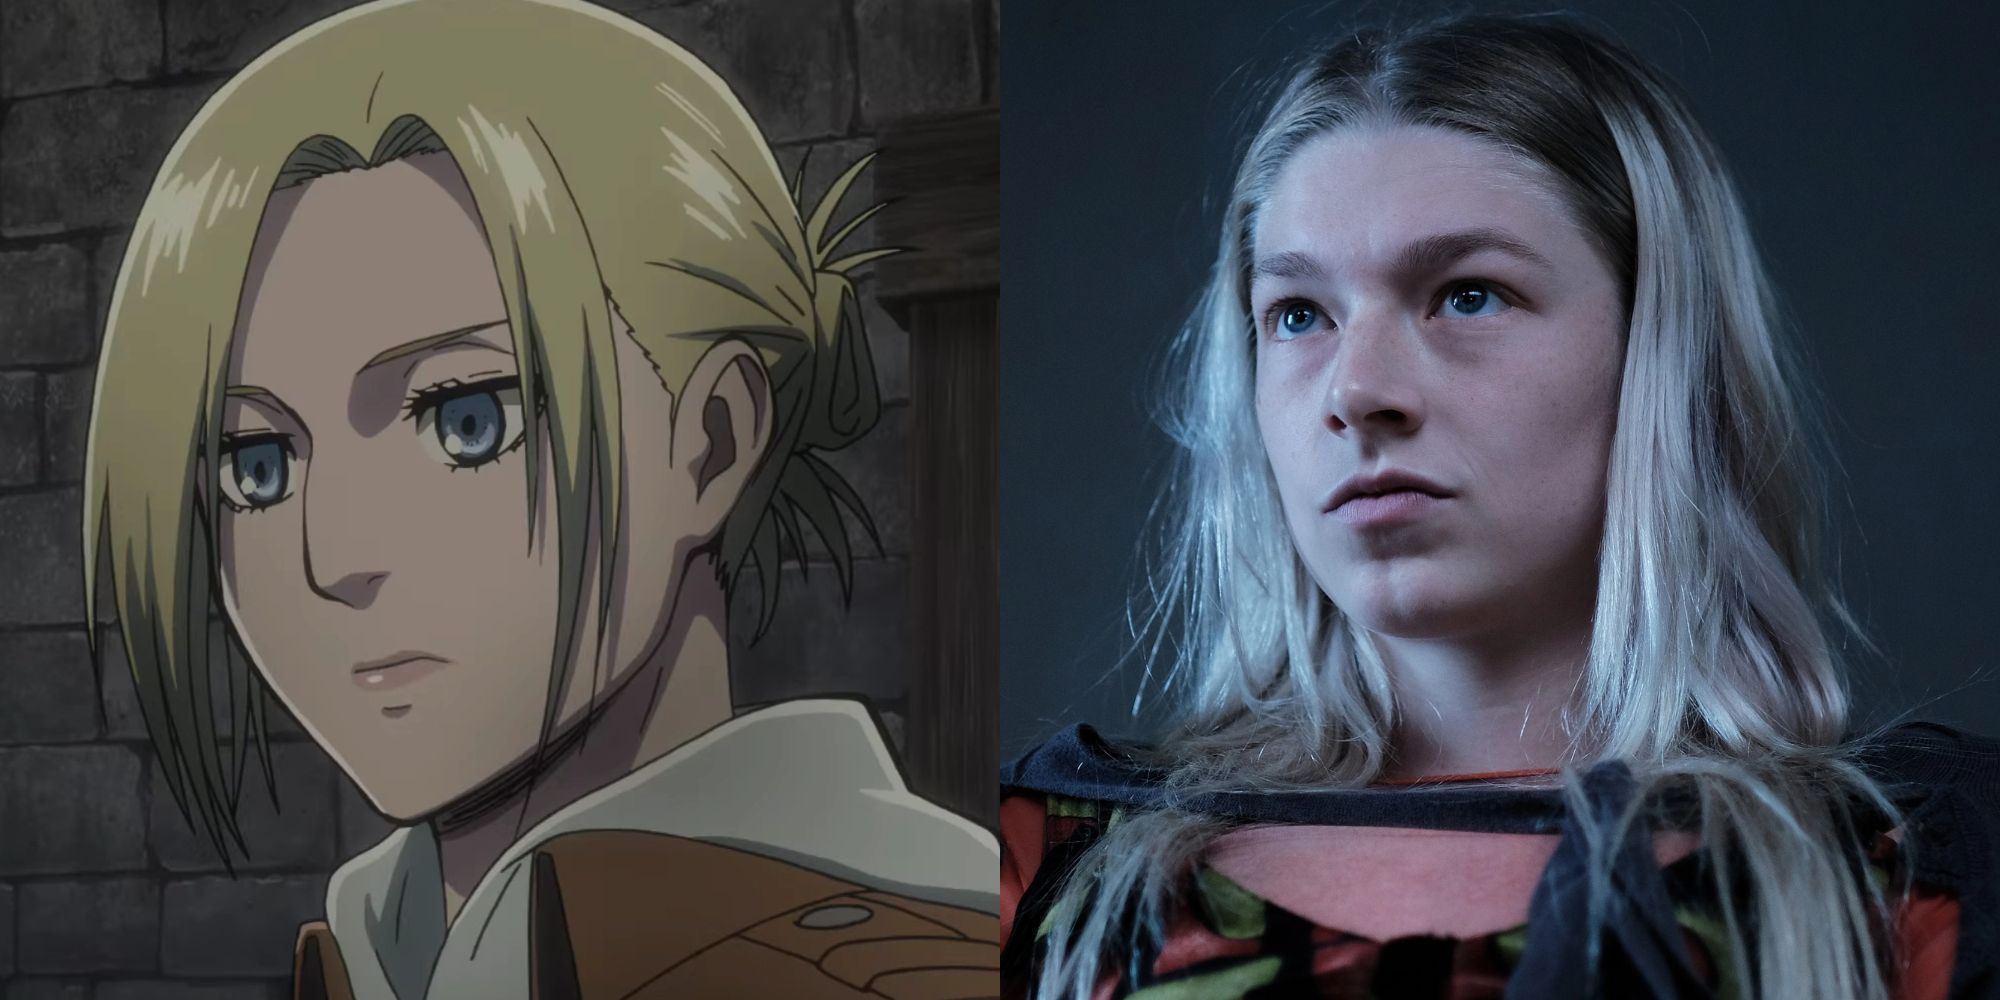 Split image of Hunter Schafer and Annie from Attack on Titan